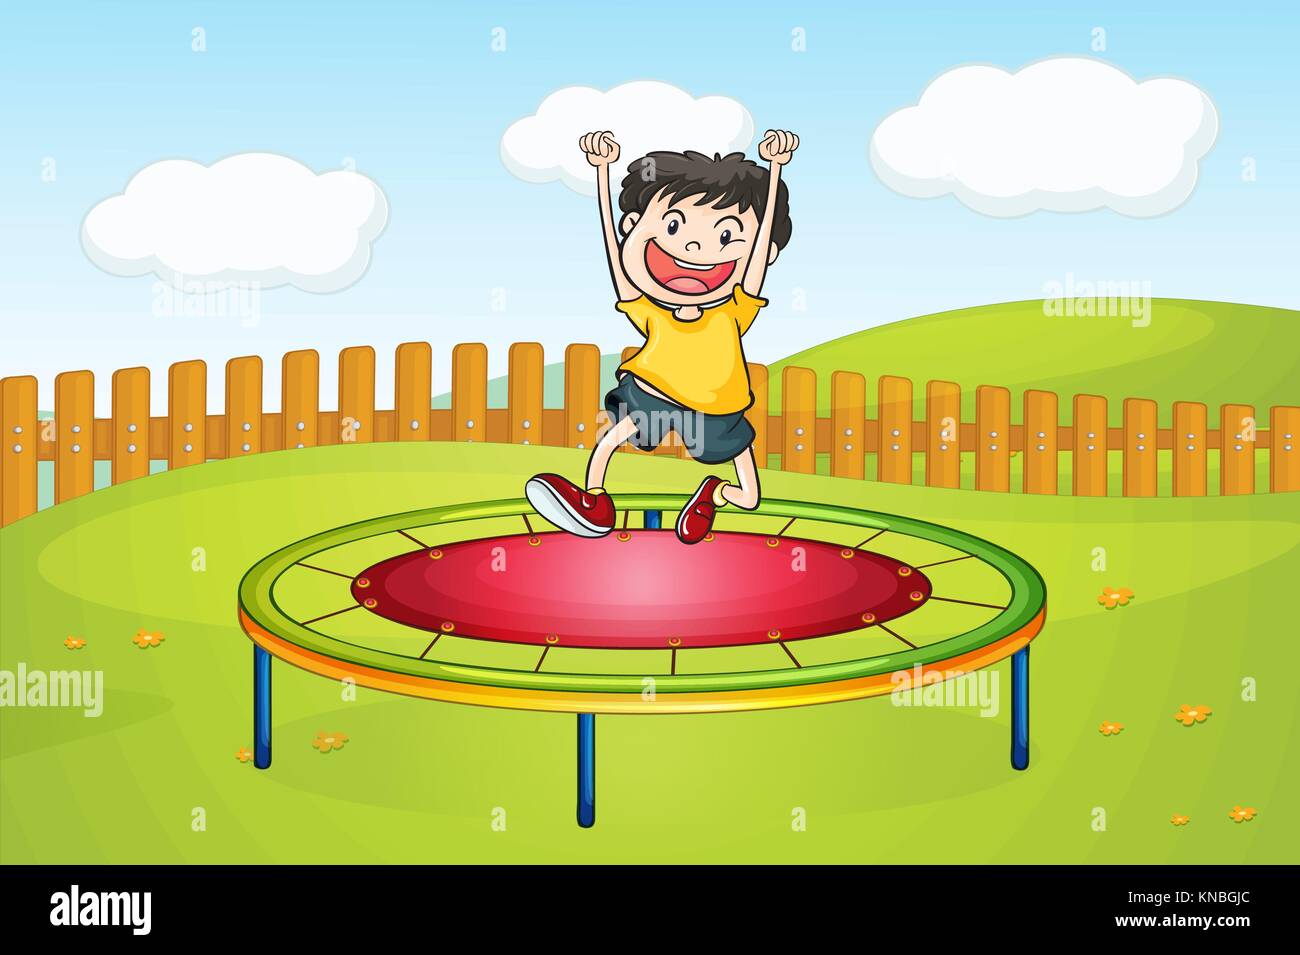 Illustration of a boy jumping on a trampoline in a beautiful nature Stock Vector